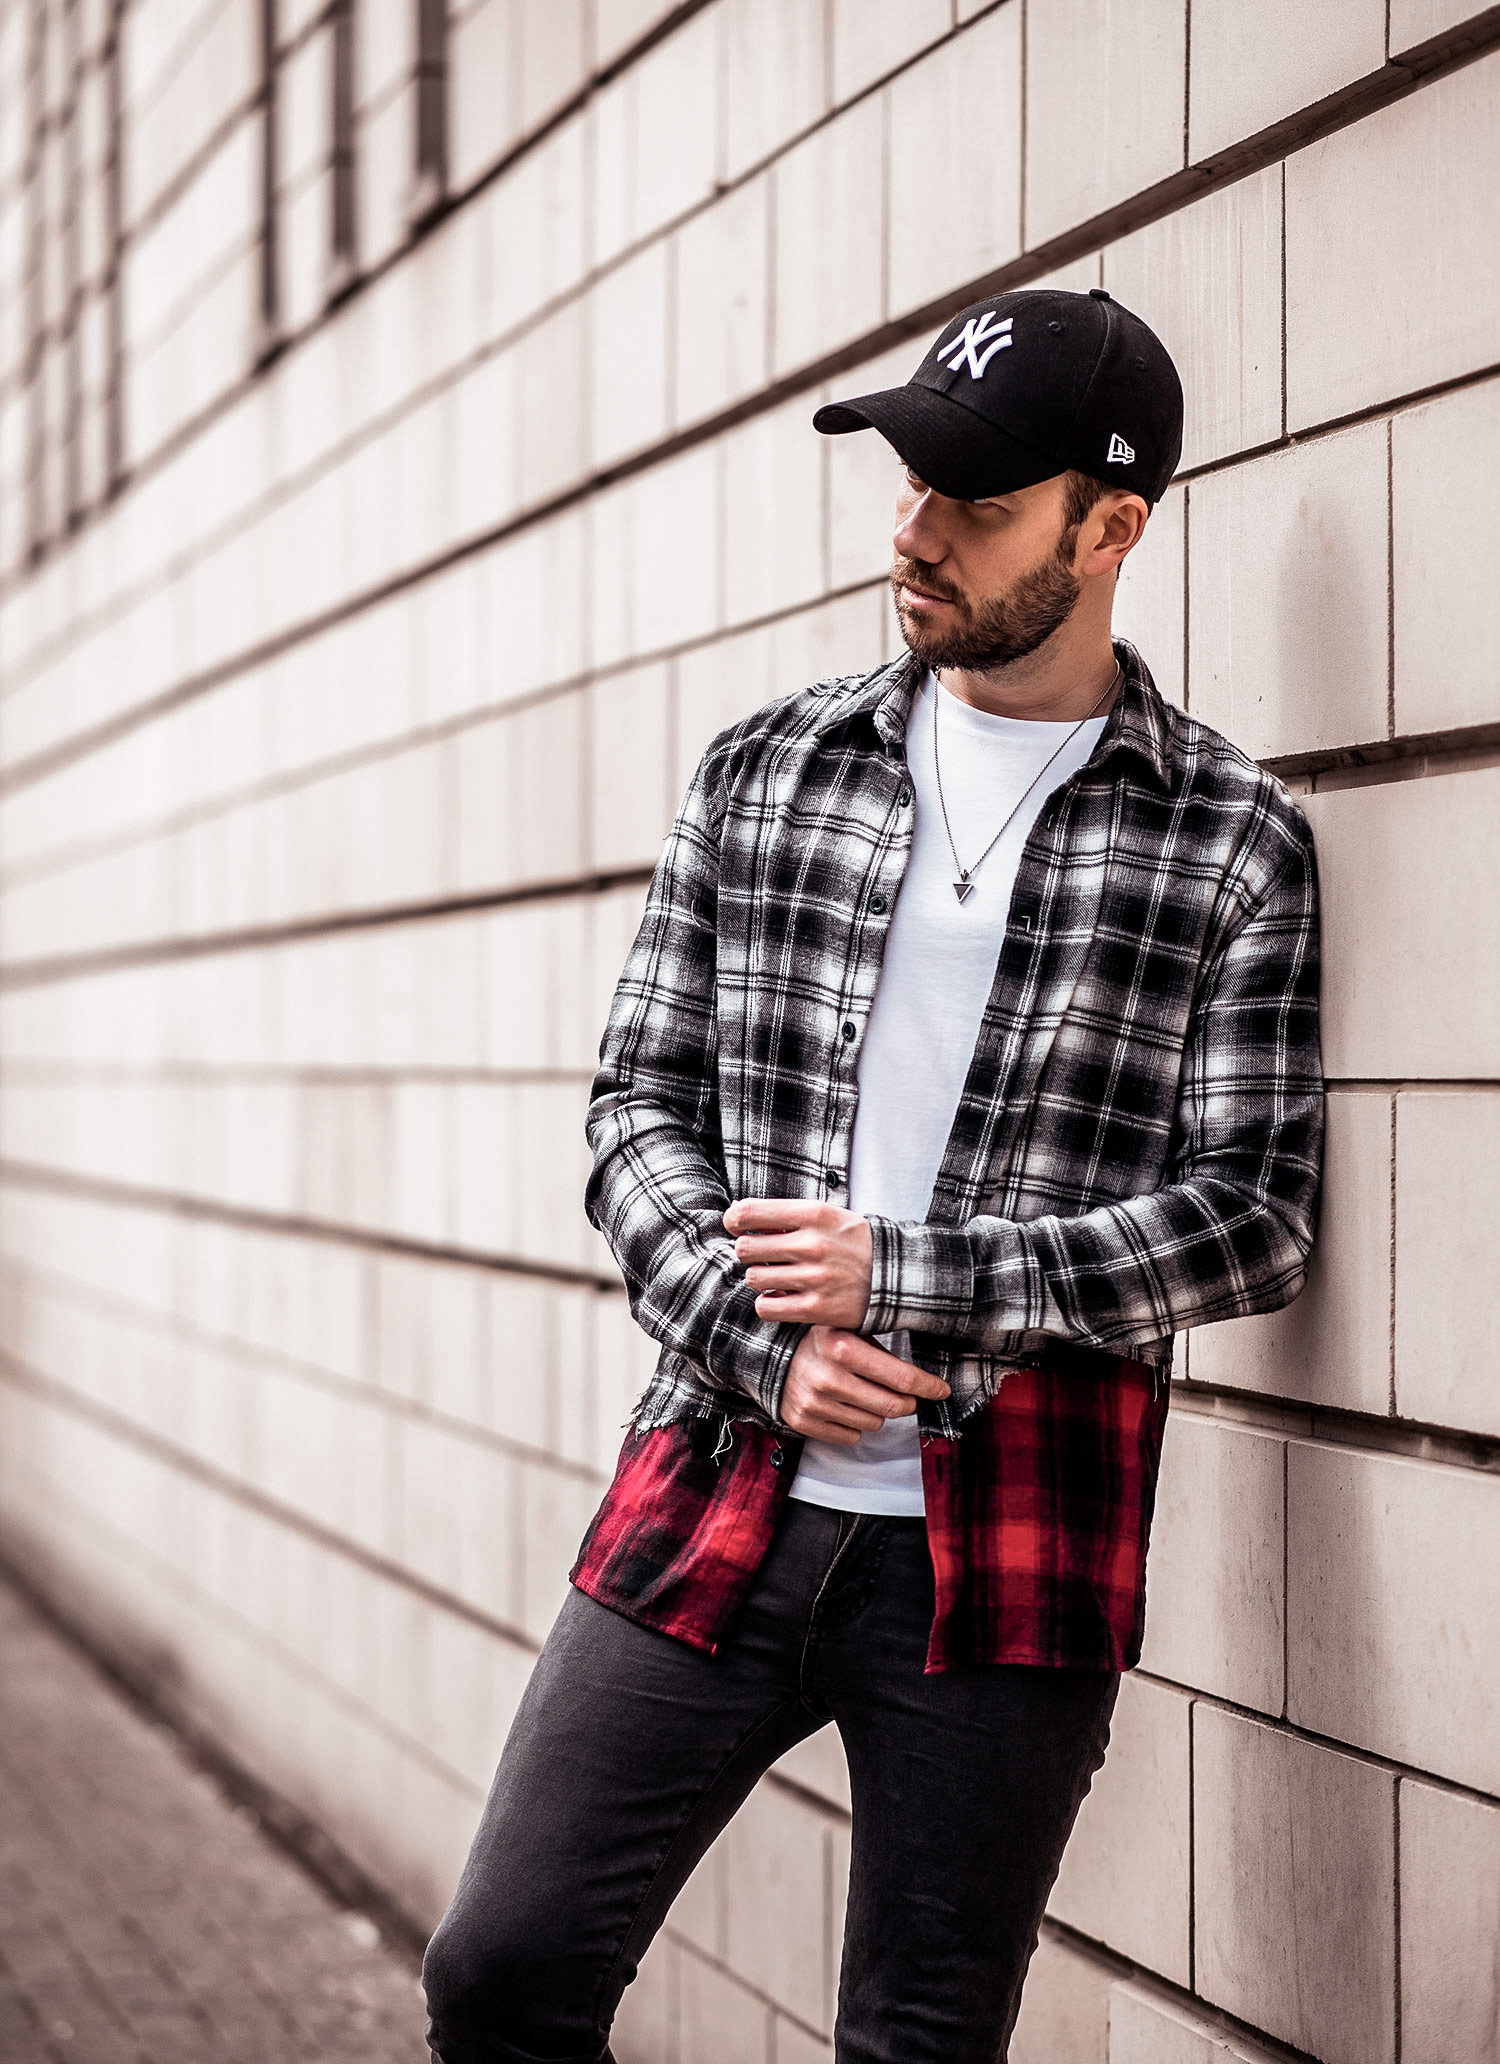 Black & Red Check Shirt Outfit - Your Average Guy